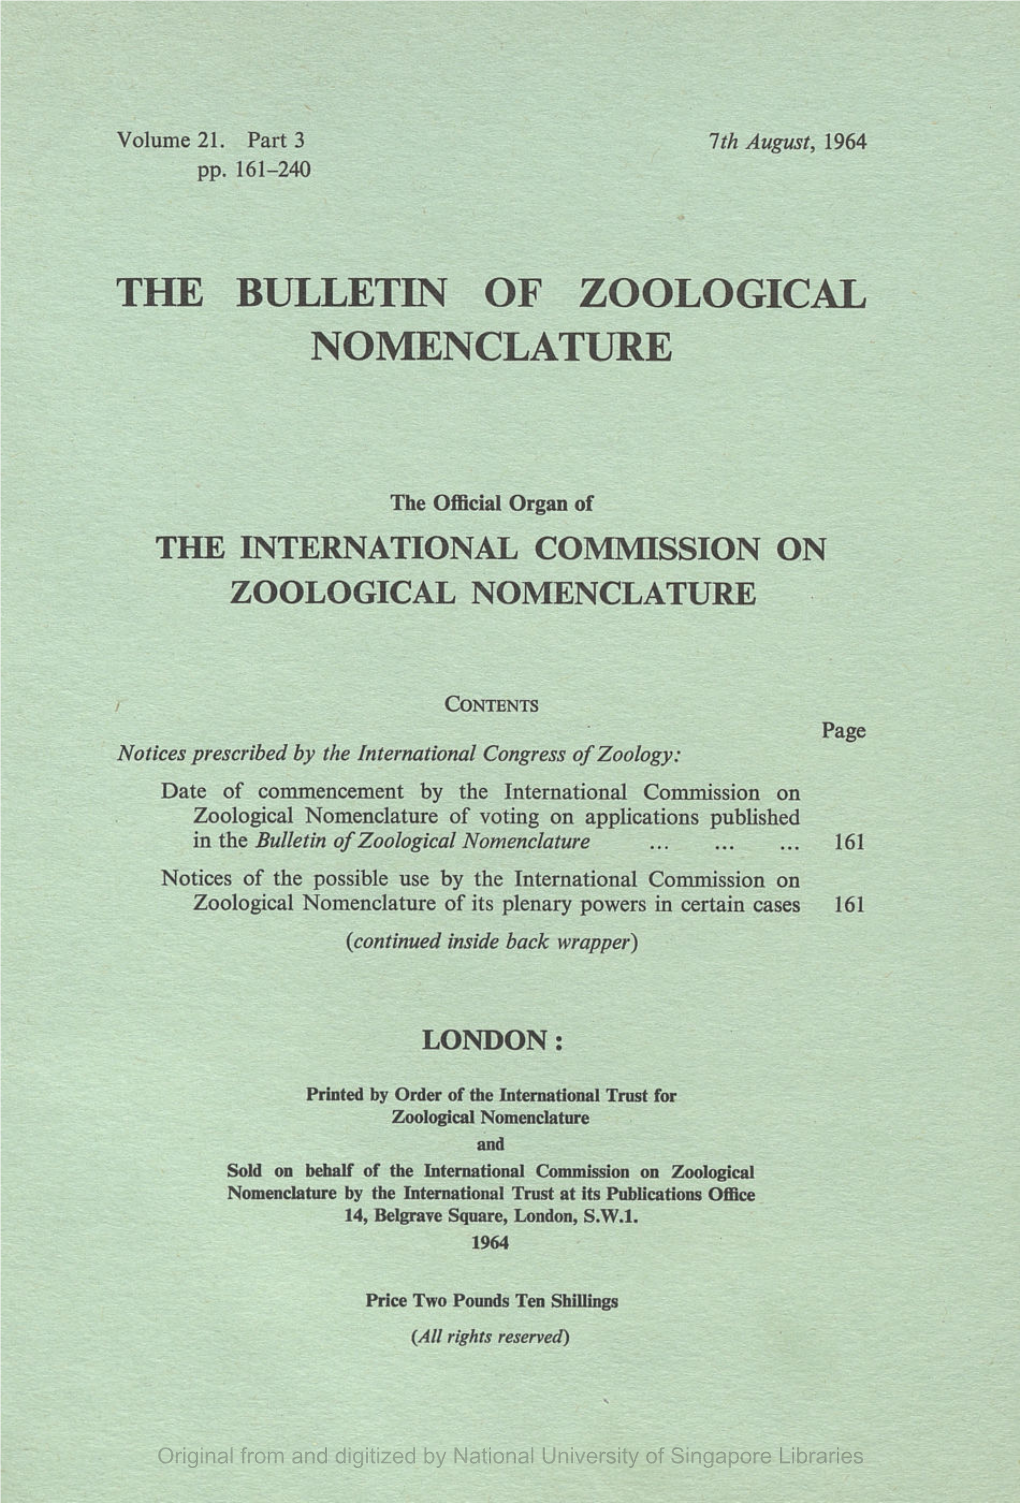 The Bulletin of Zoological Nomenclature, Vol.21, Part 3